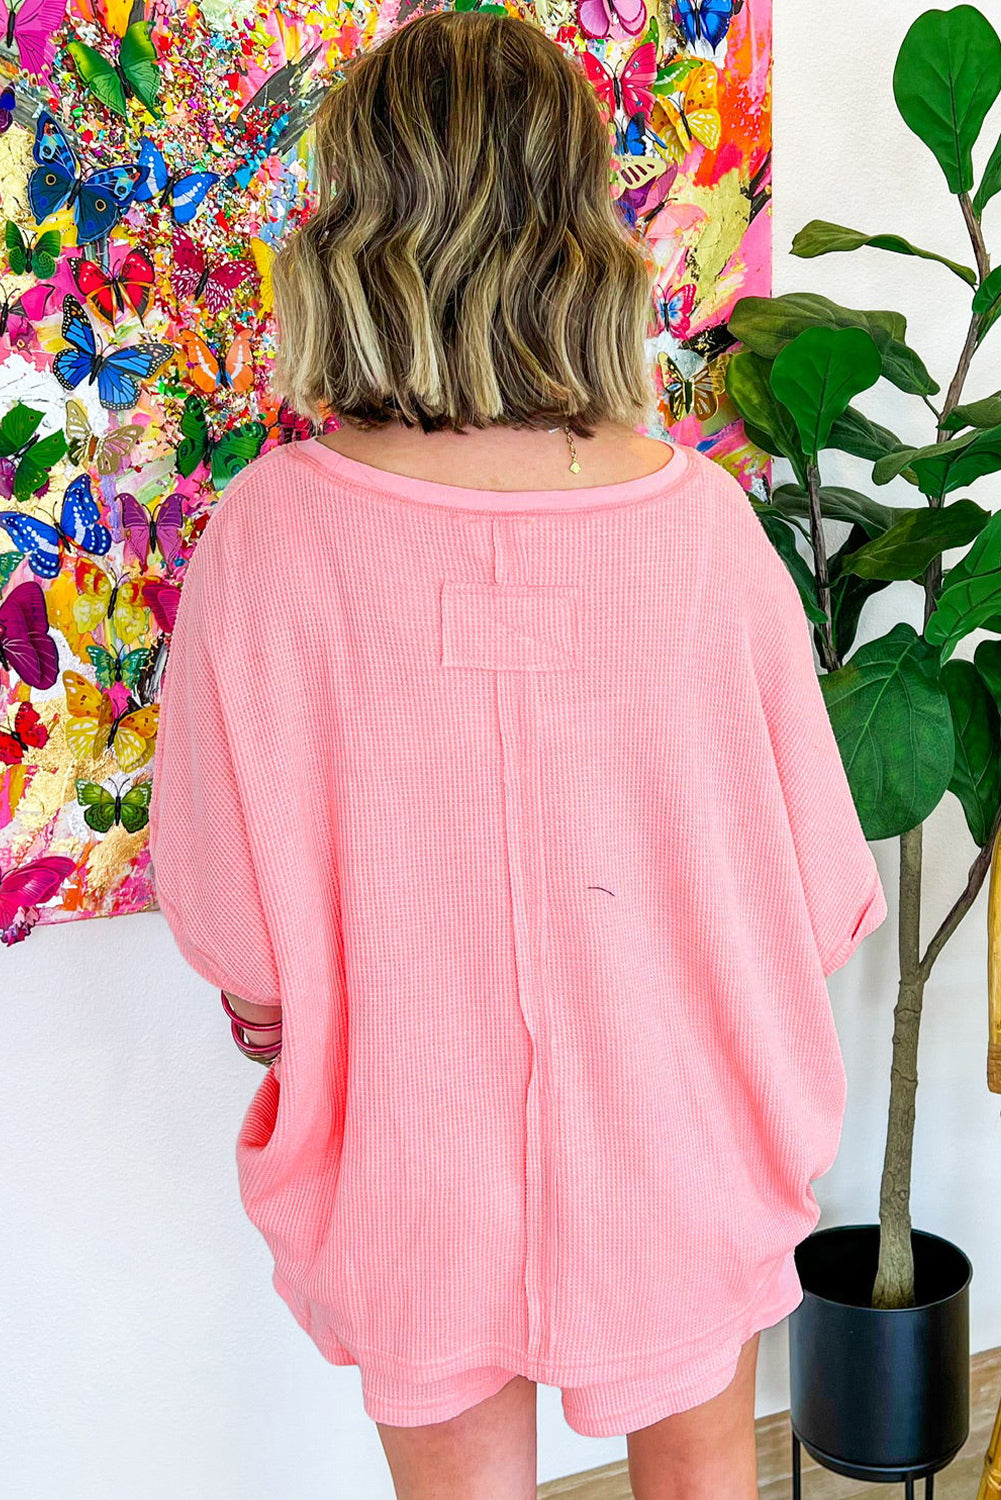 Pink Plus Size Waffle Knit Exposed Seam Tee and Shorts Set